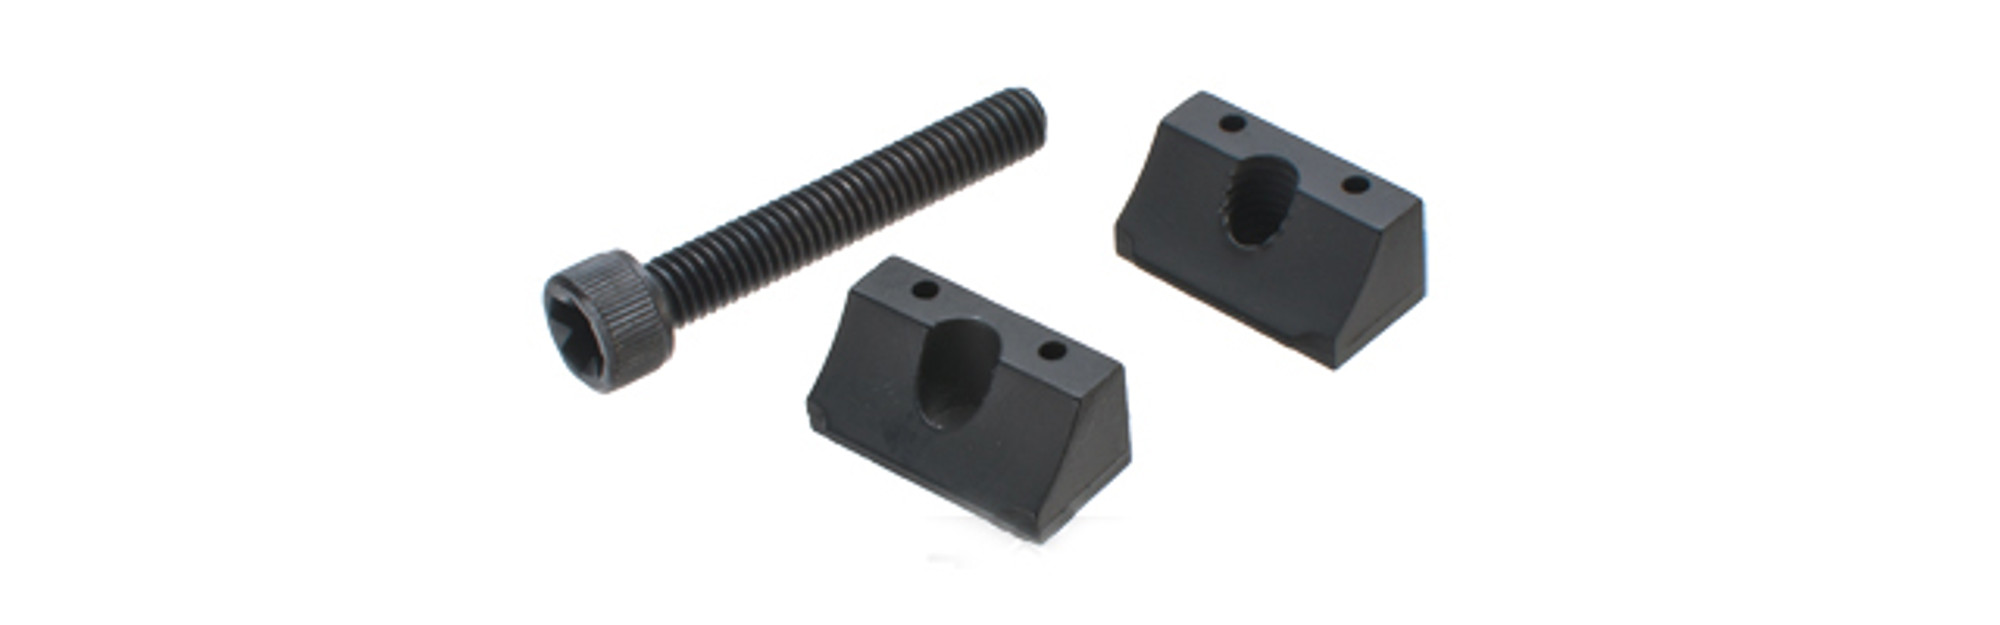 WE-Tech Rail System Anchors for 416 Series Airsoft GBB Rifles